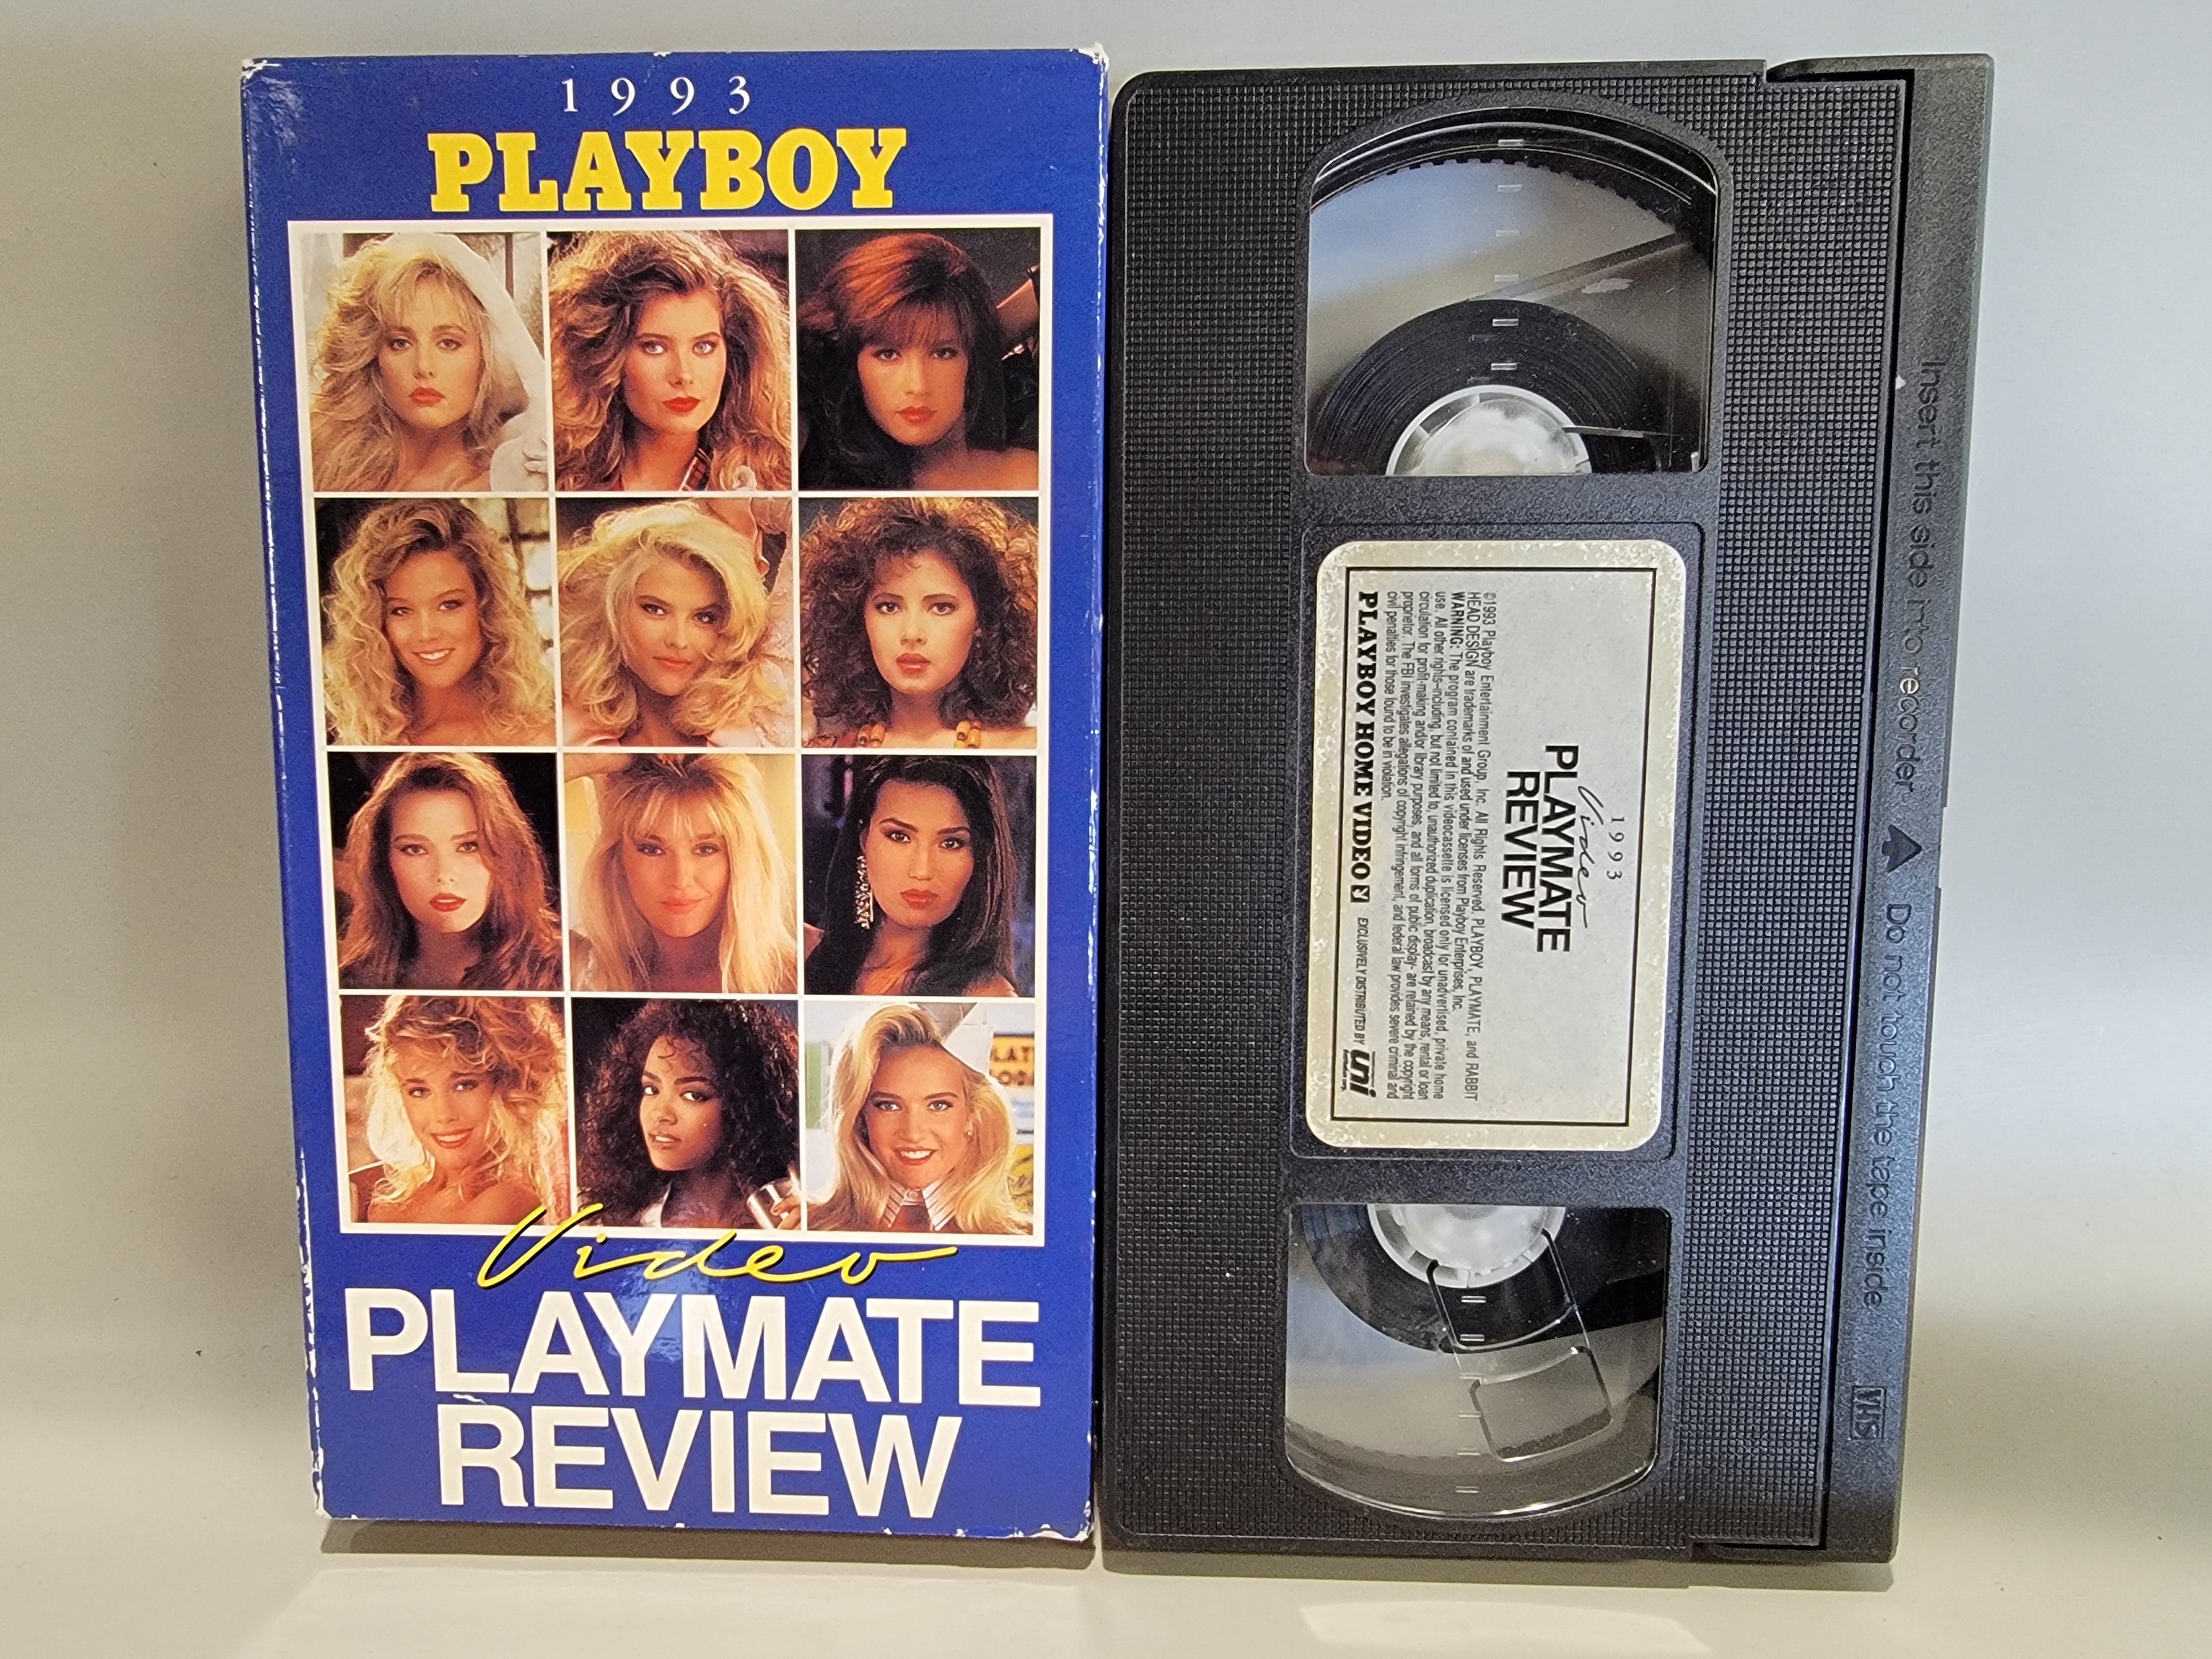 PLAYBOY: 1993 VIDEO PLAYMATE REVIEW VHS [USED]